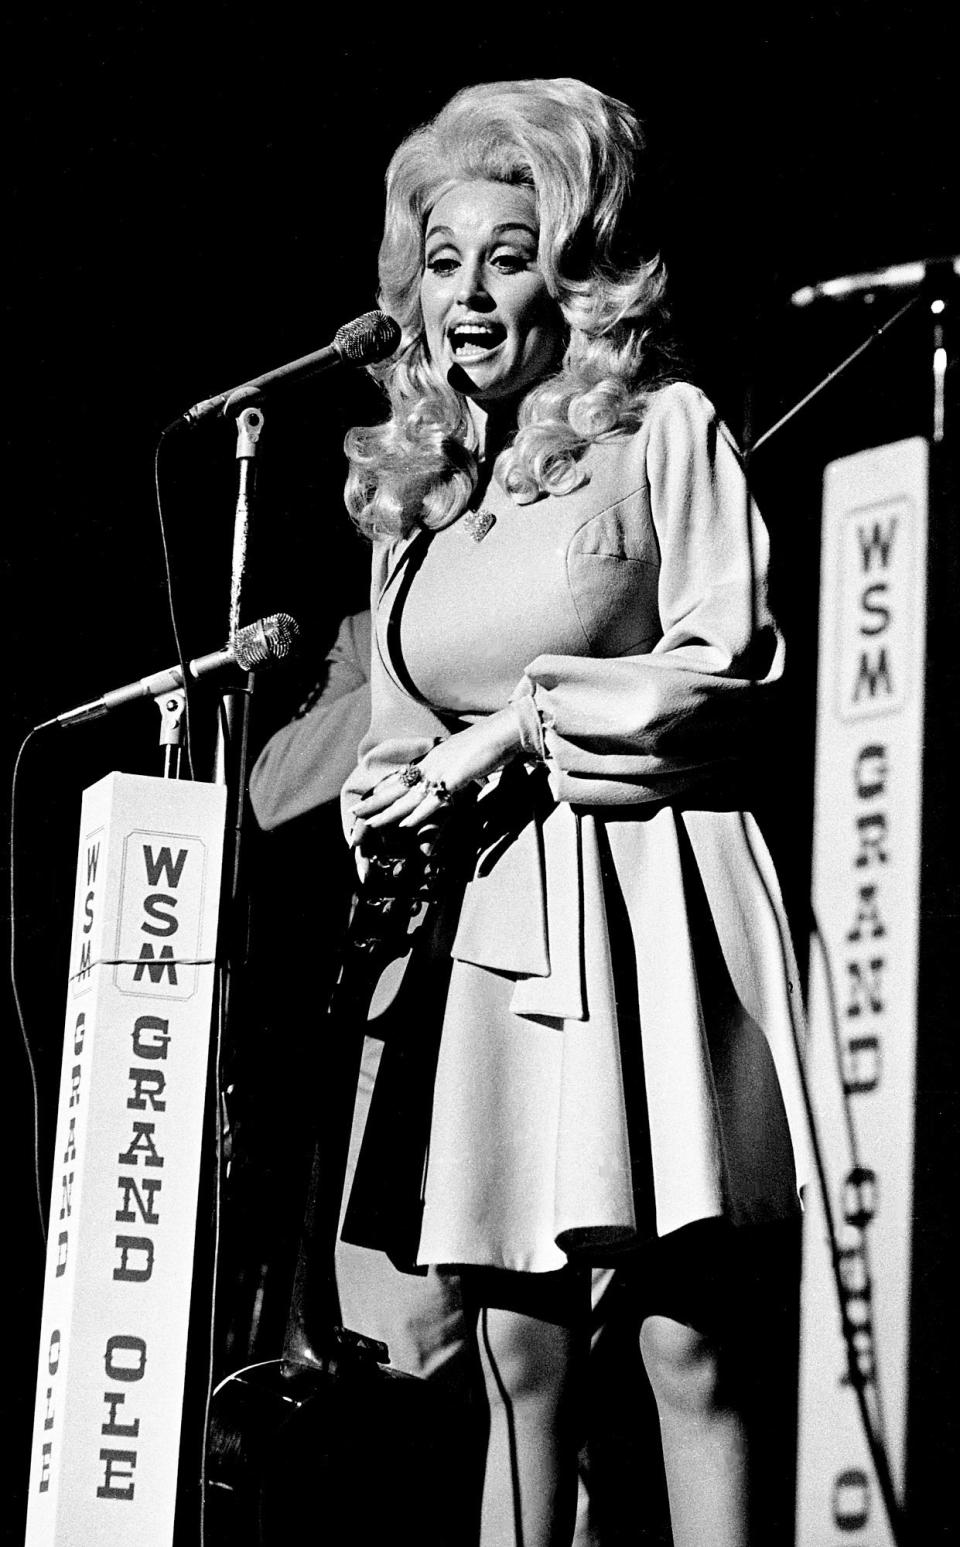 Dolly Parton performs during the Grand Ole Opry show on the stage of the Ryman Auditorium on July 21, 1973.